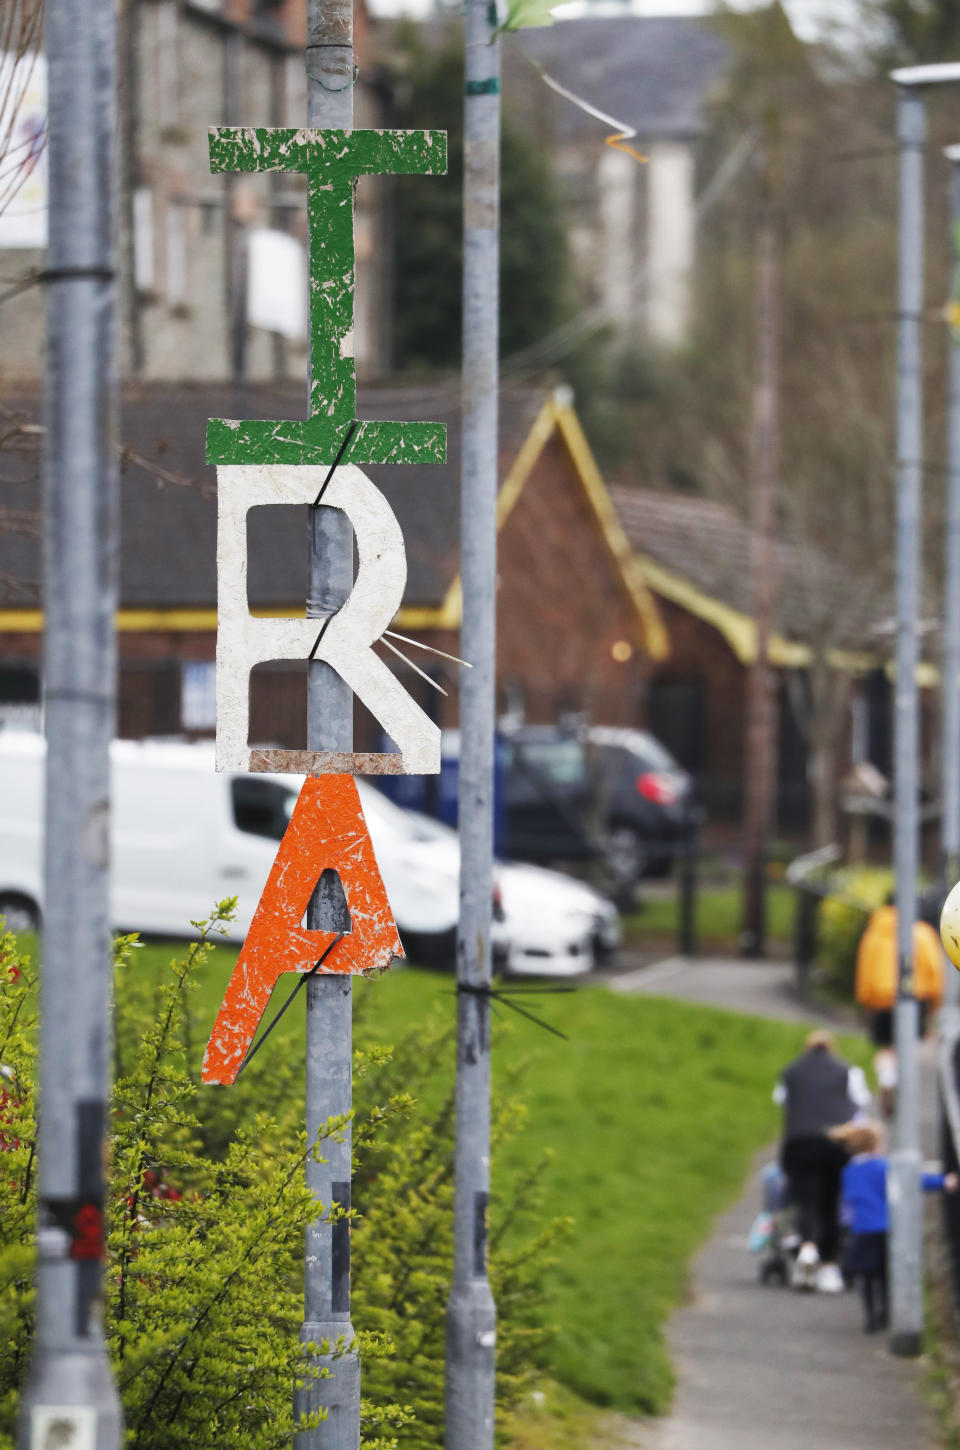 An Irish Republican Army sign hangs from a lamppost in Londonderry, Northern Ireland, Monday, April 3, 2023. It has been 25 years since the Good Friday Agreement largely ended a conflict in Northern Ireland that left 3,600 people dead. (AP Photo/Peter Morrison)